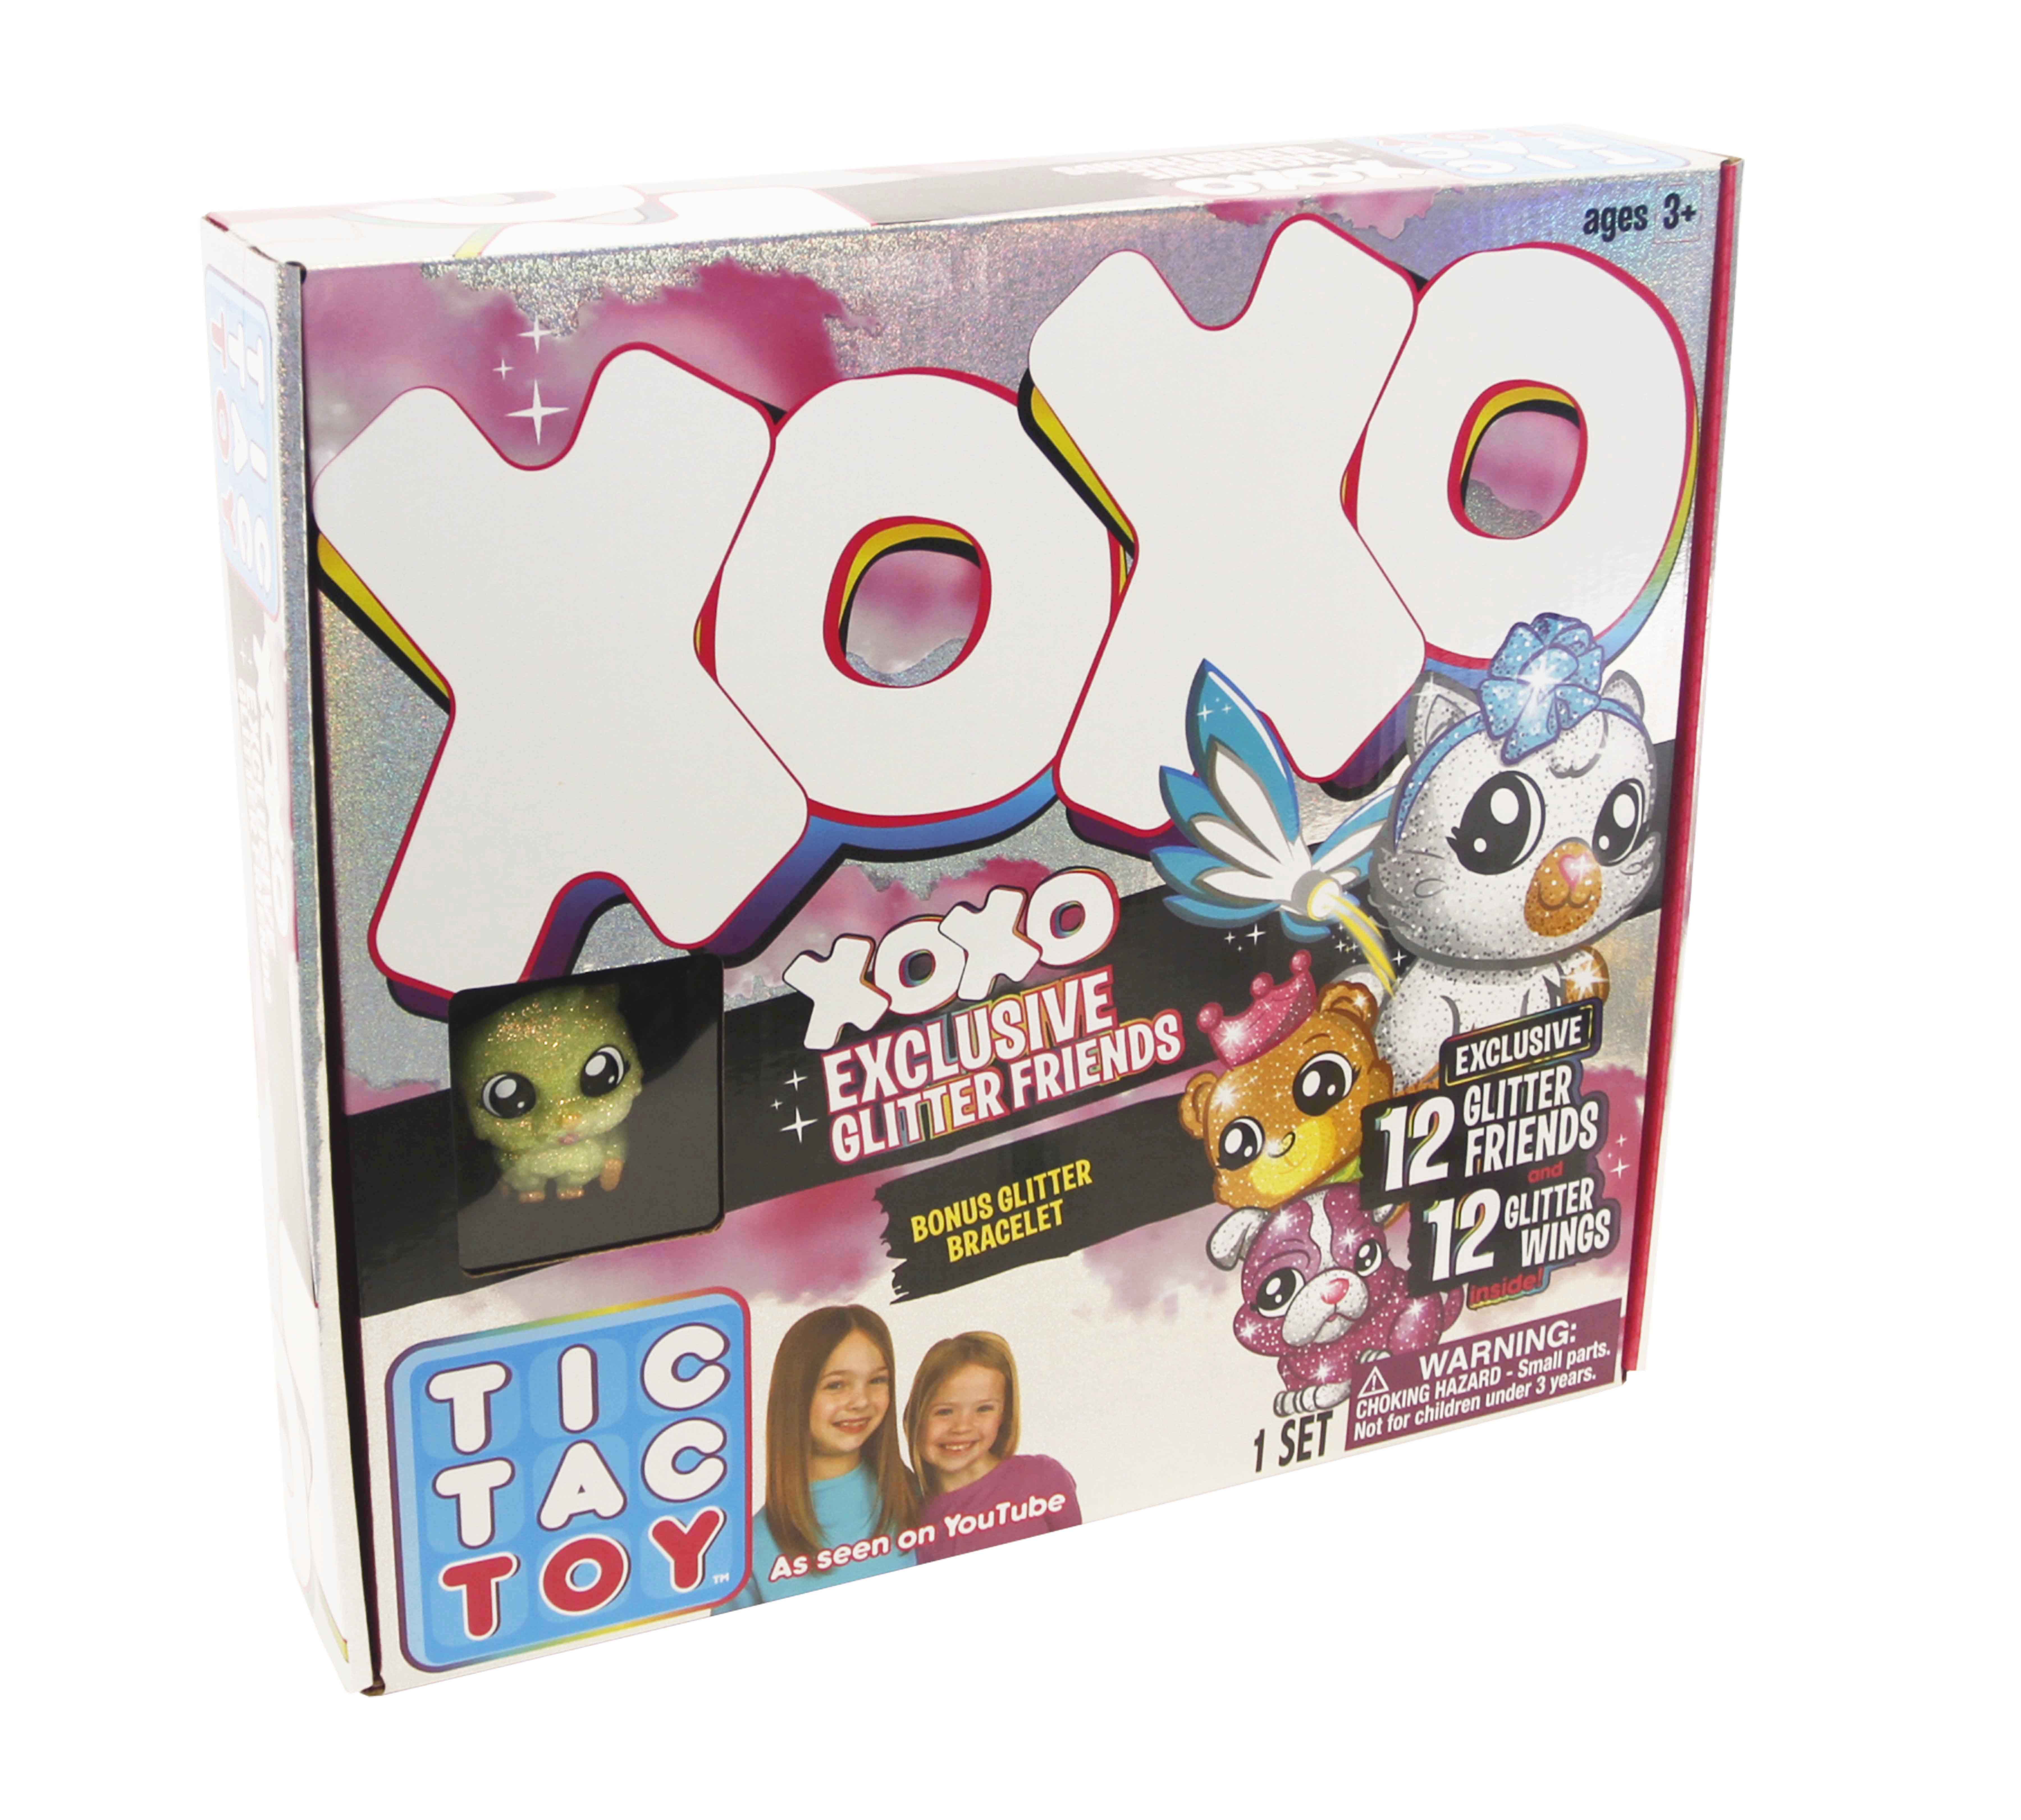 Tic Tac Toy XOXO Exclusive Glitter Friends - image 2 of 5